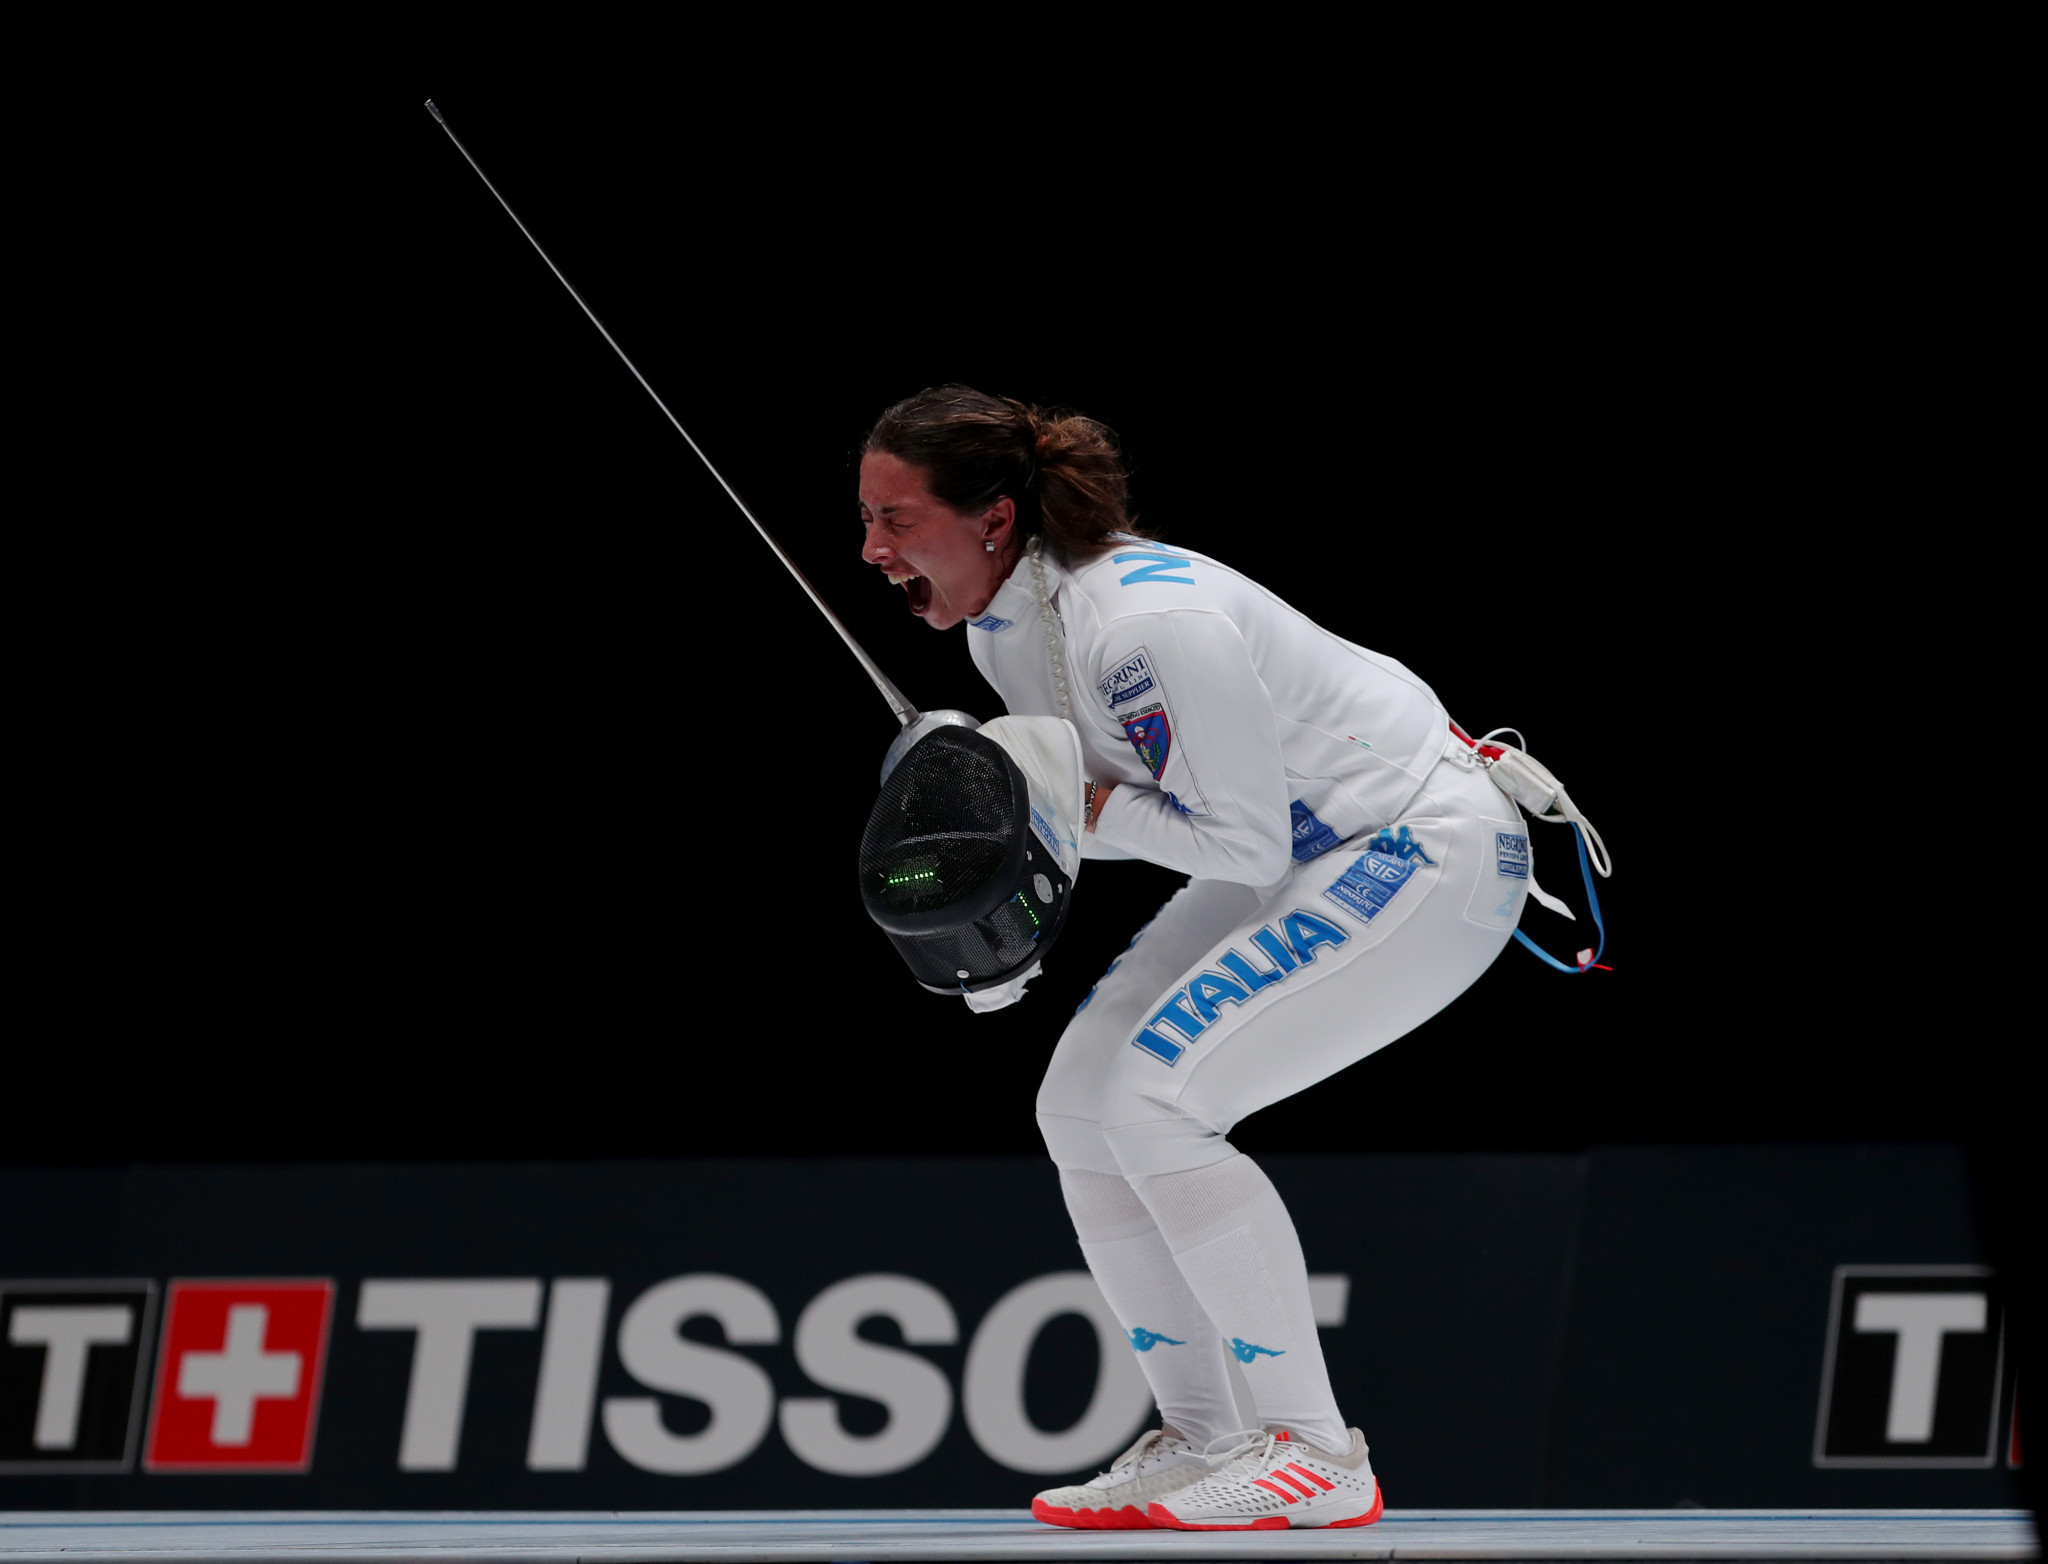 World champion and world number one Mara Navarria of Italy will be in women's épée action in Barcelona ©Getty Images